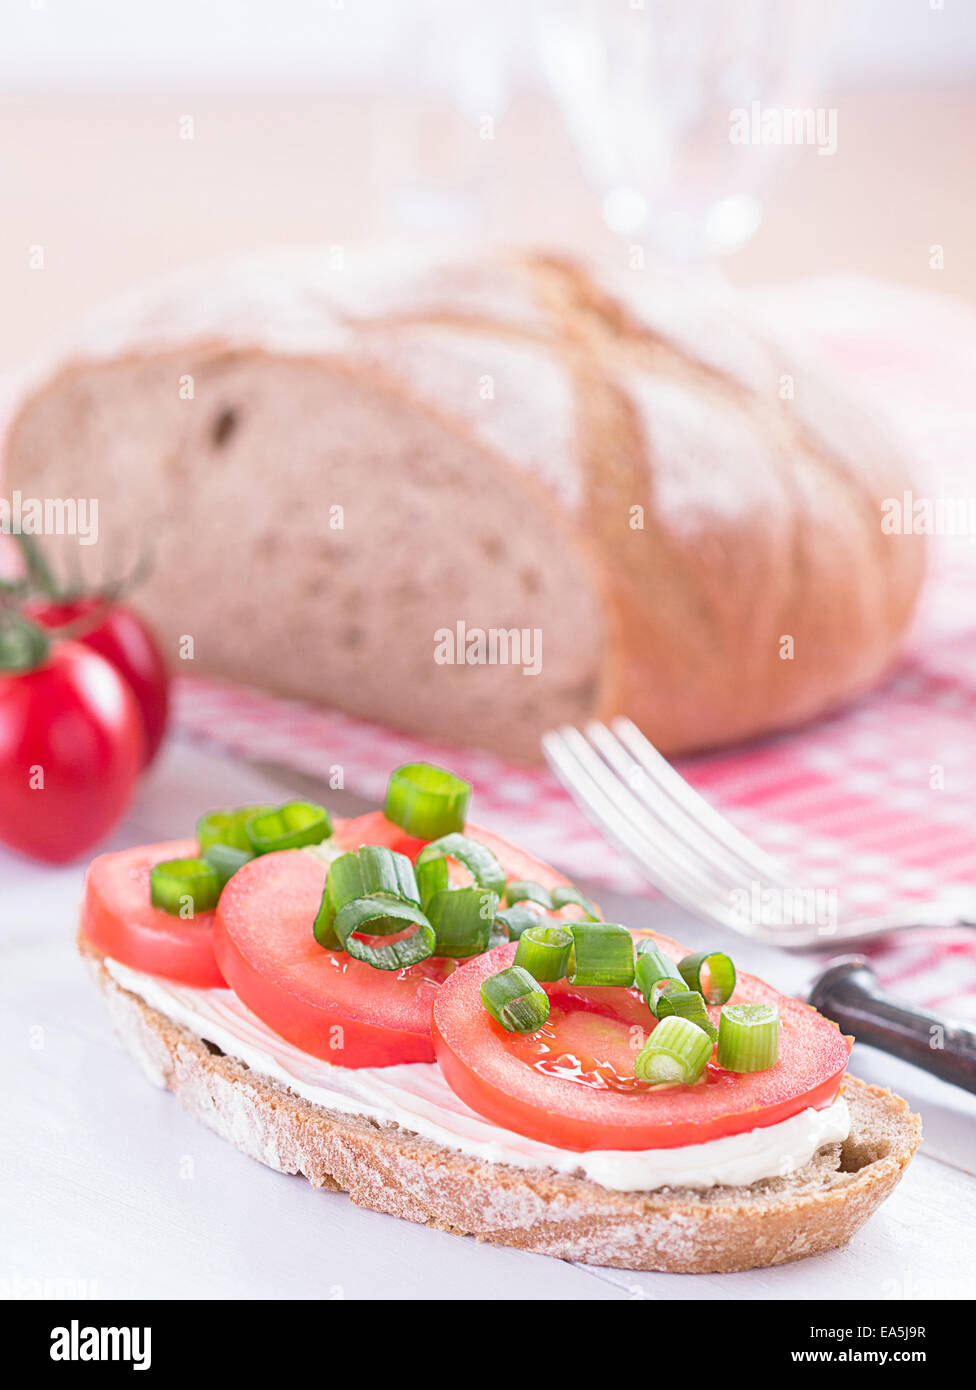 A slice of bread filled with tomato slices. Stock Photo